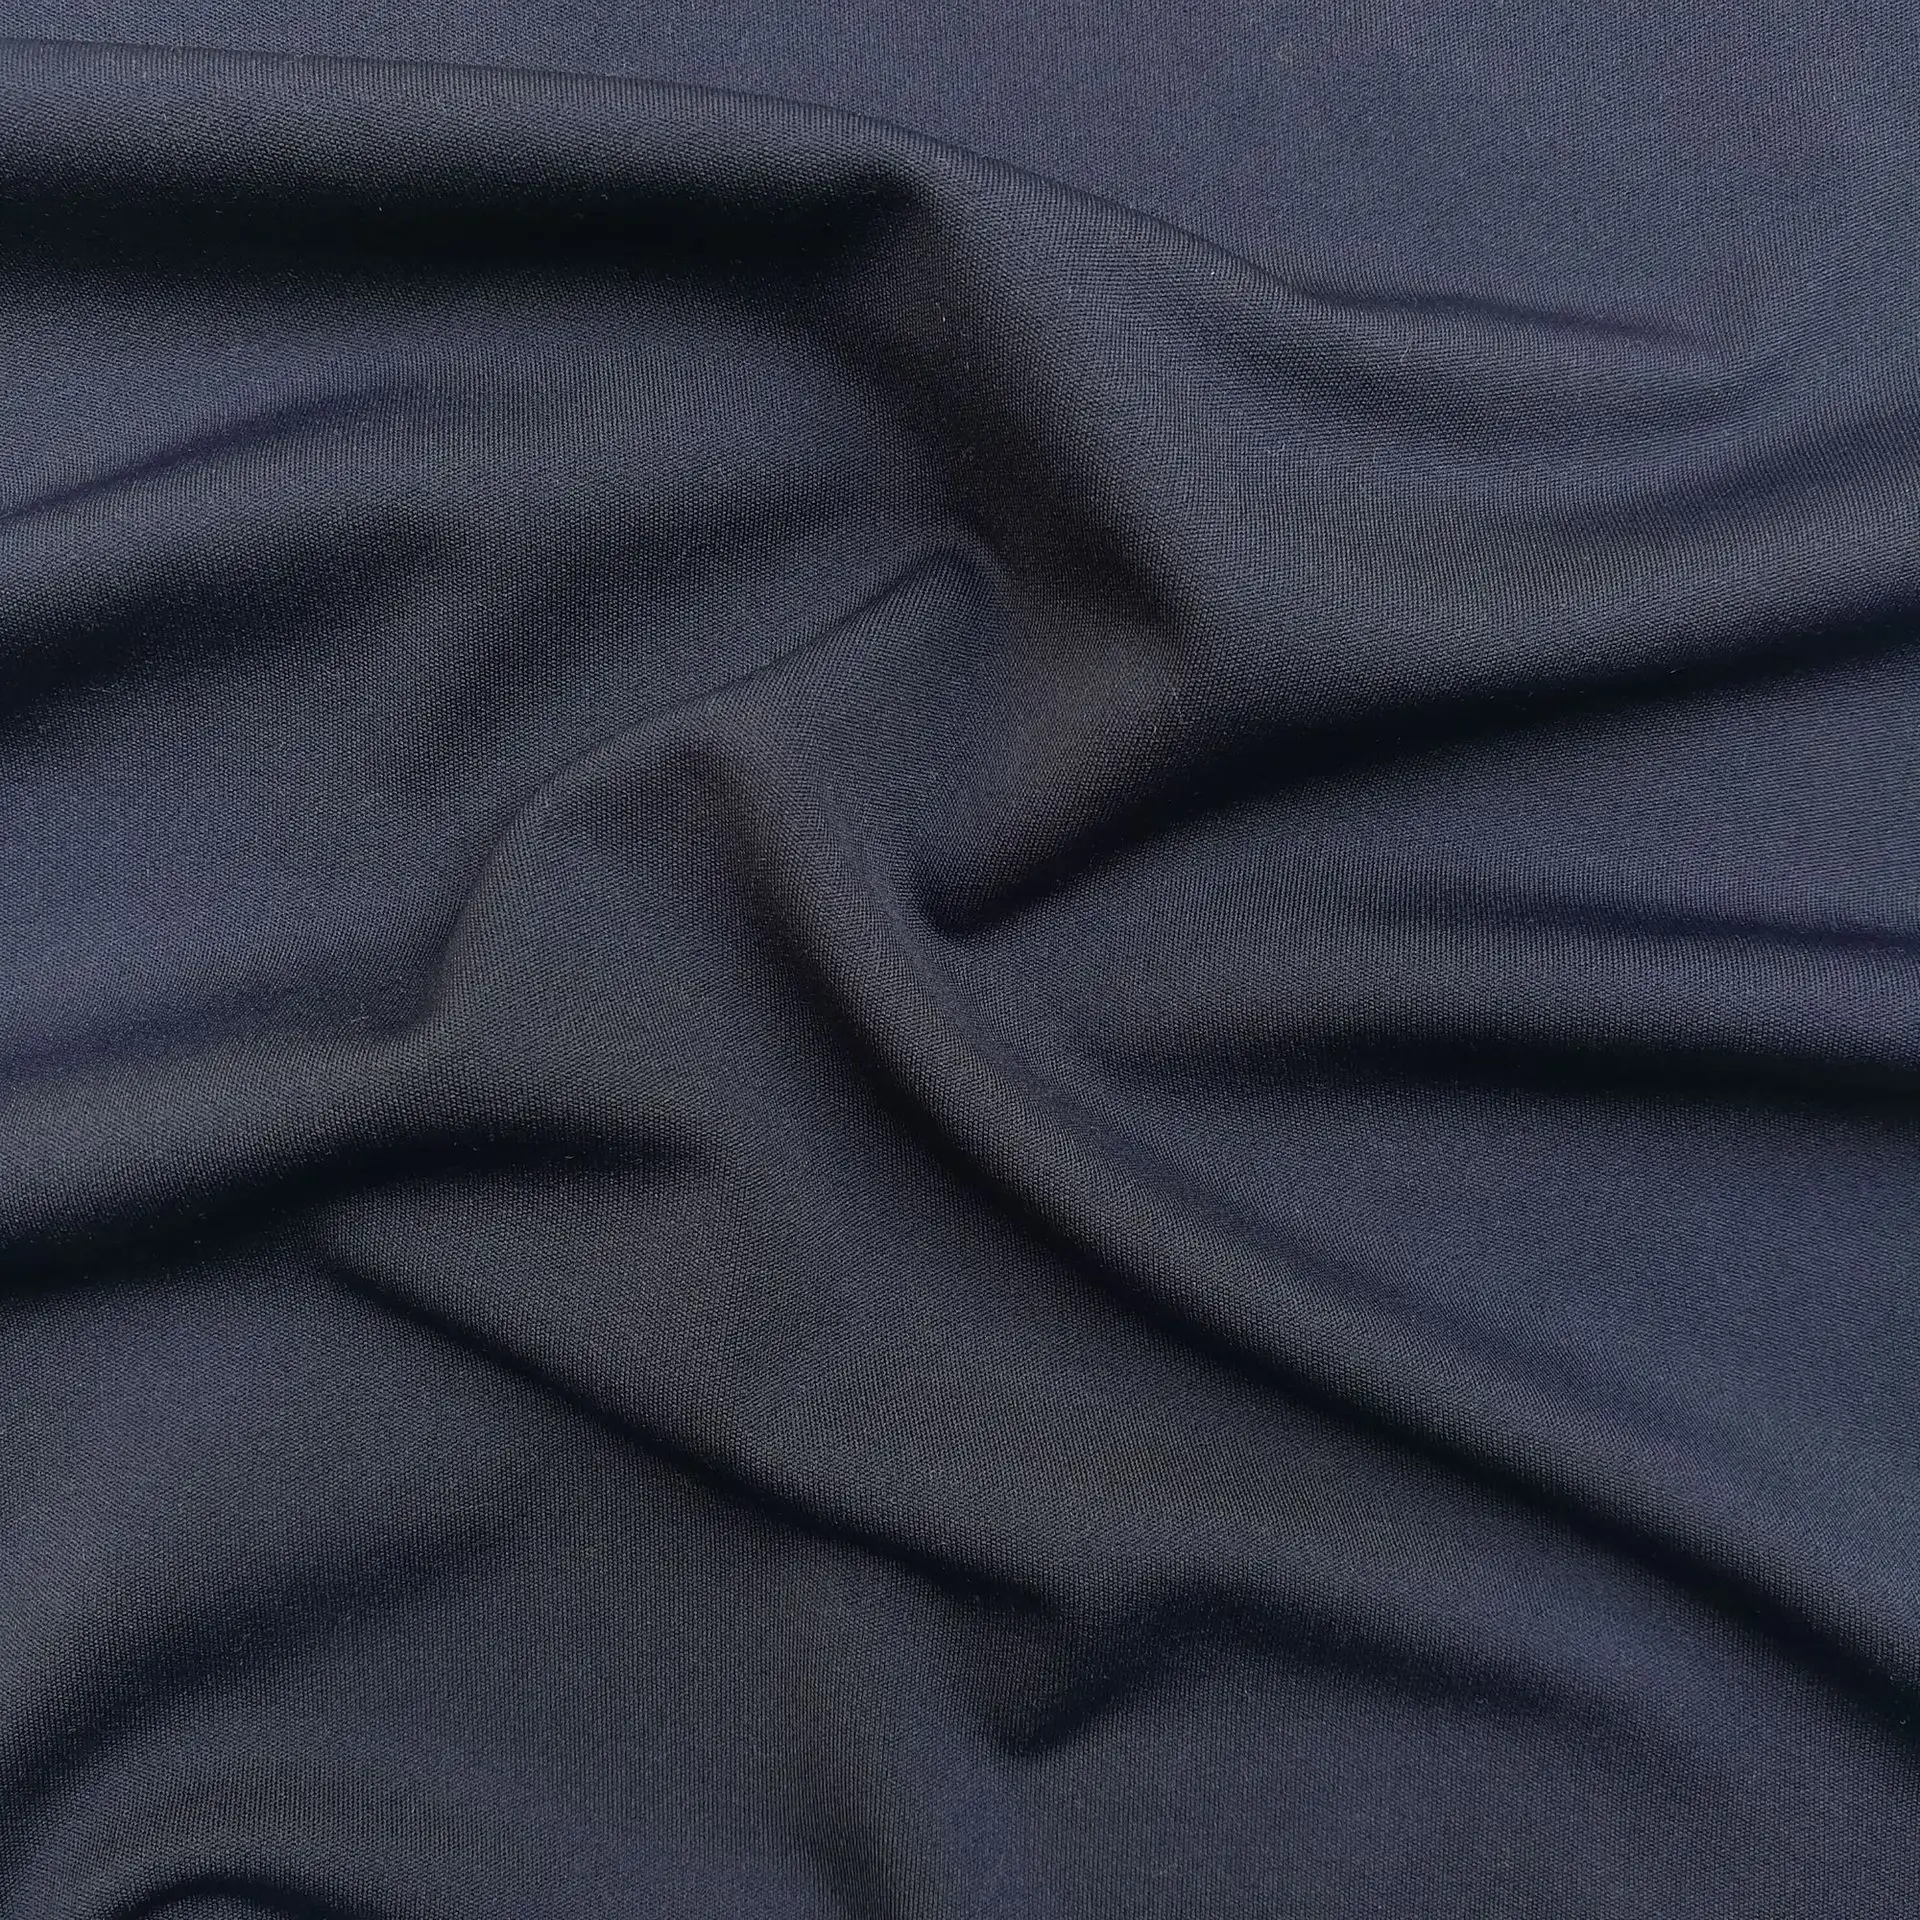 2021 New winter zurich fabric for yoga dry fit football jersey polyester